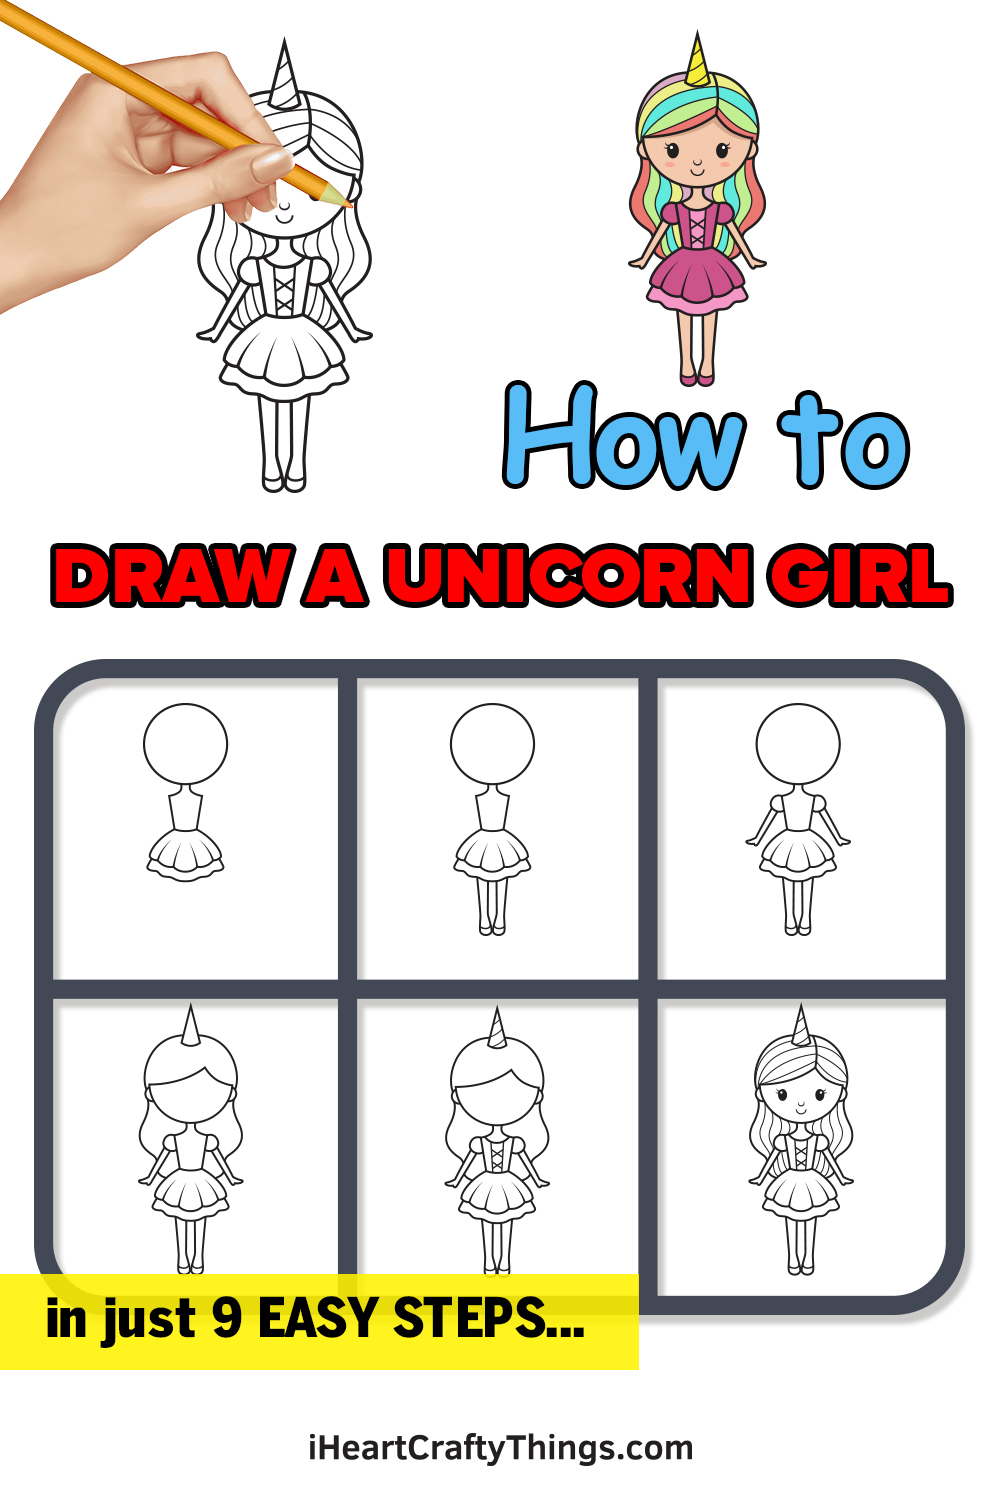 how to draw a unicorn girl in 9 easy steps